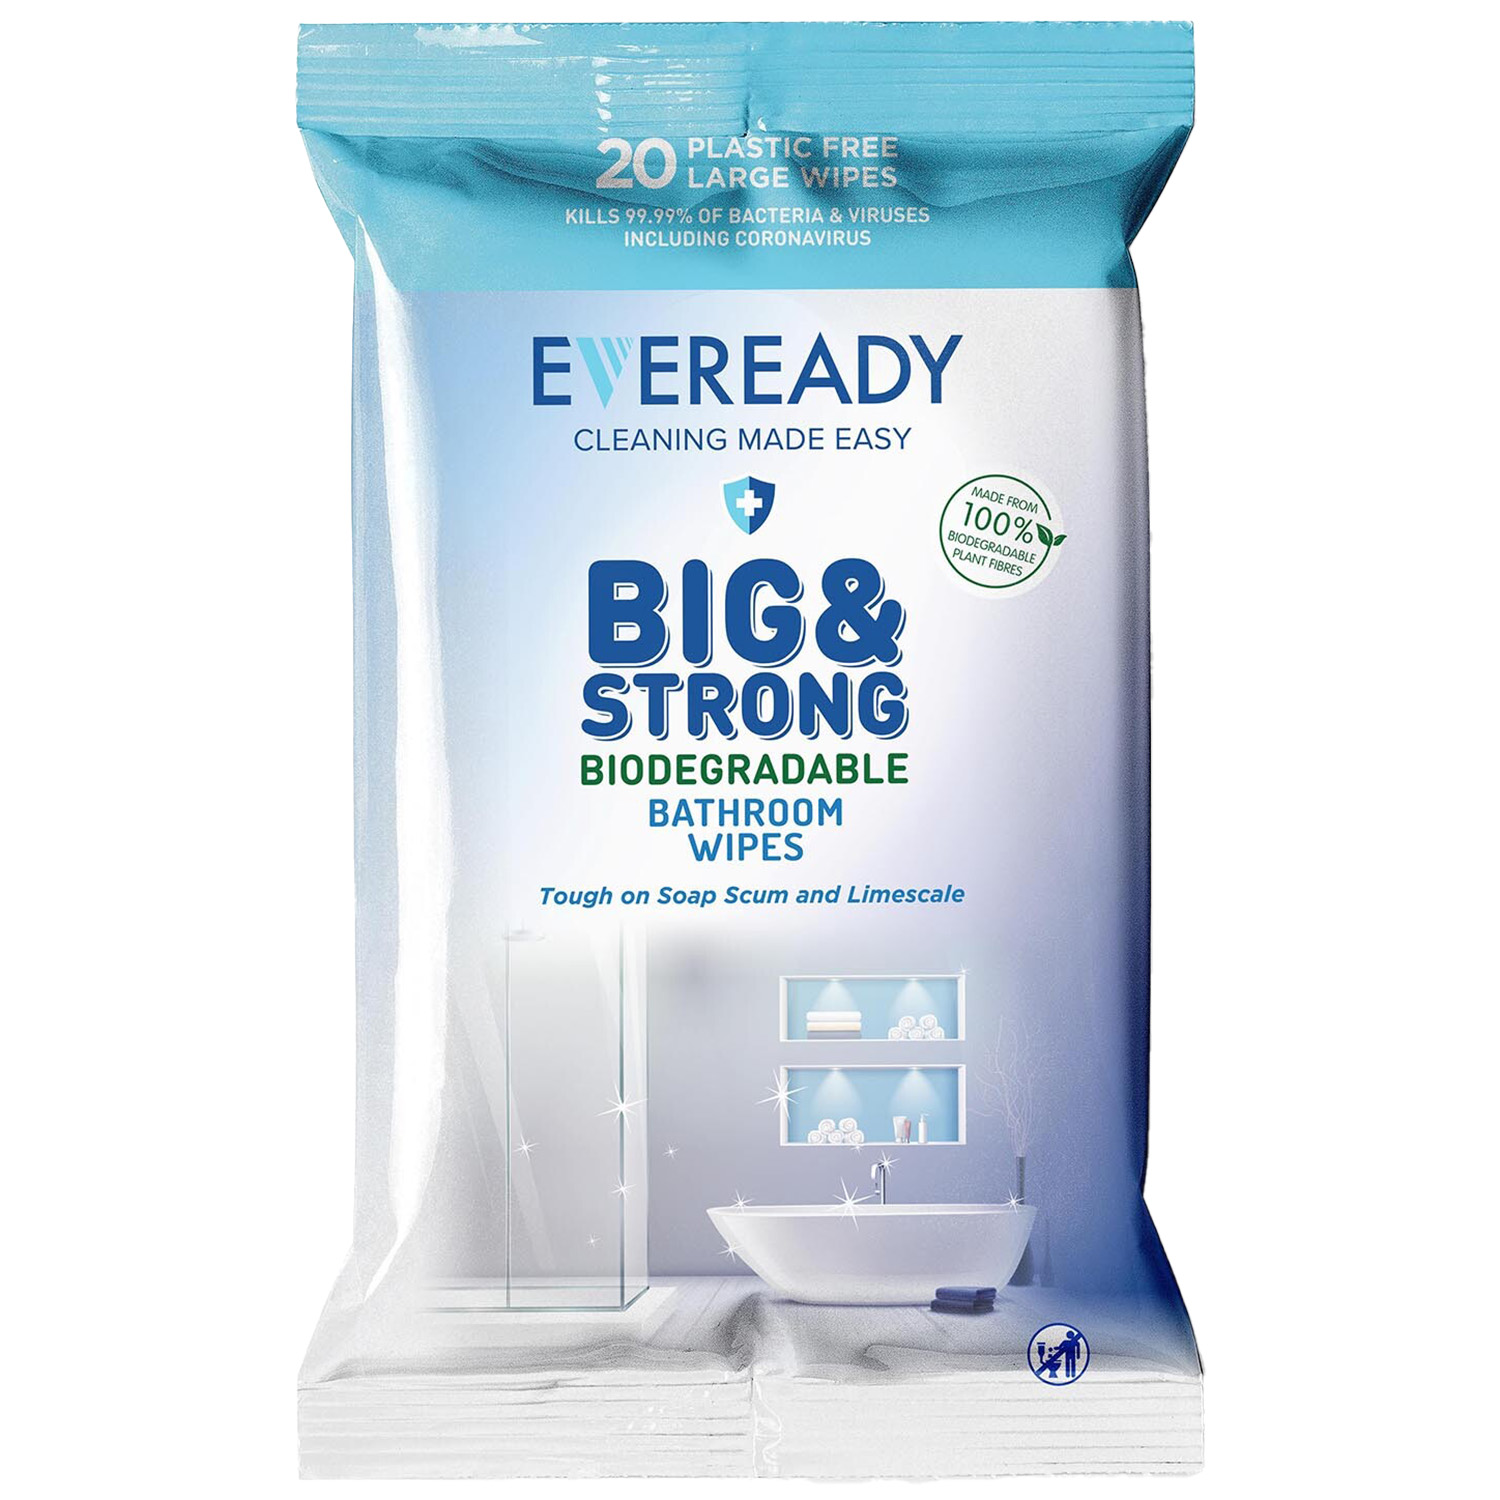 Eveready Big and Strong Biodegradable Bathroom Wipes Image